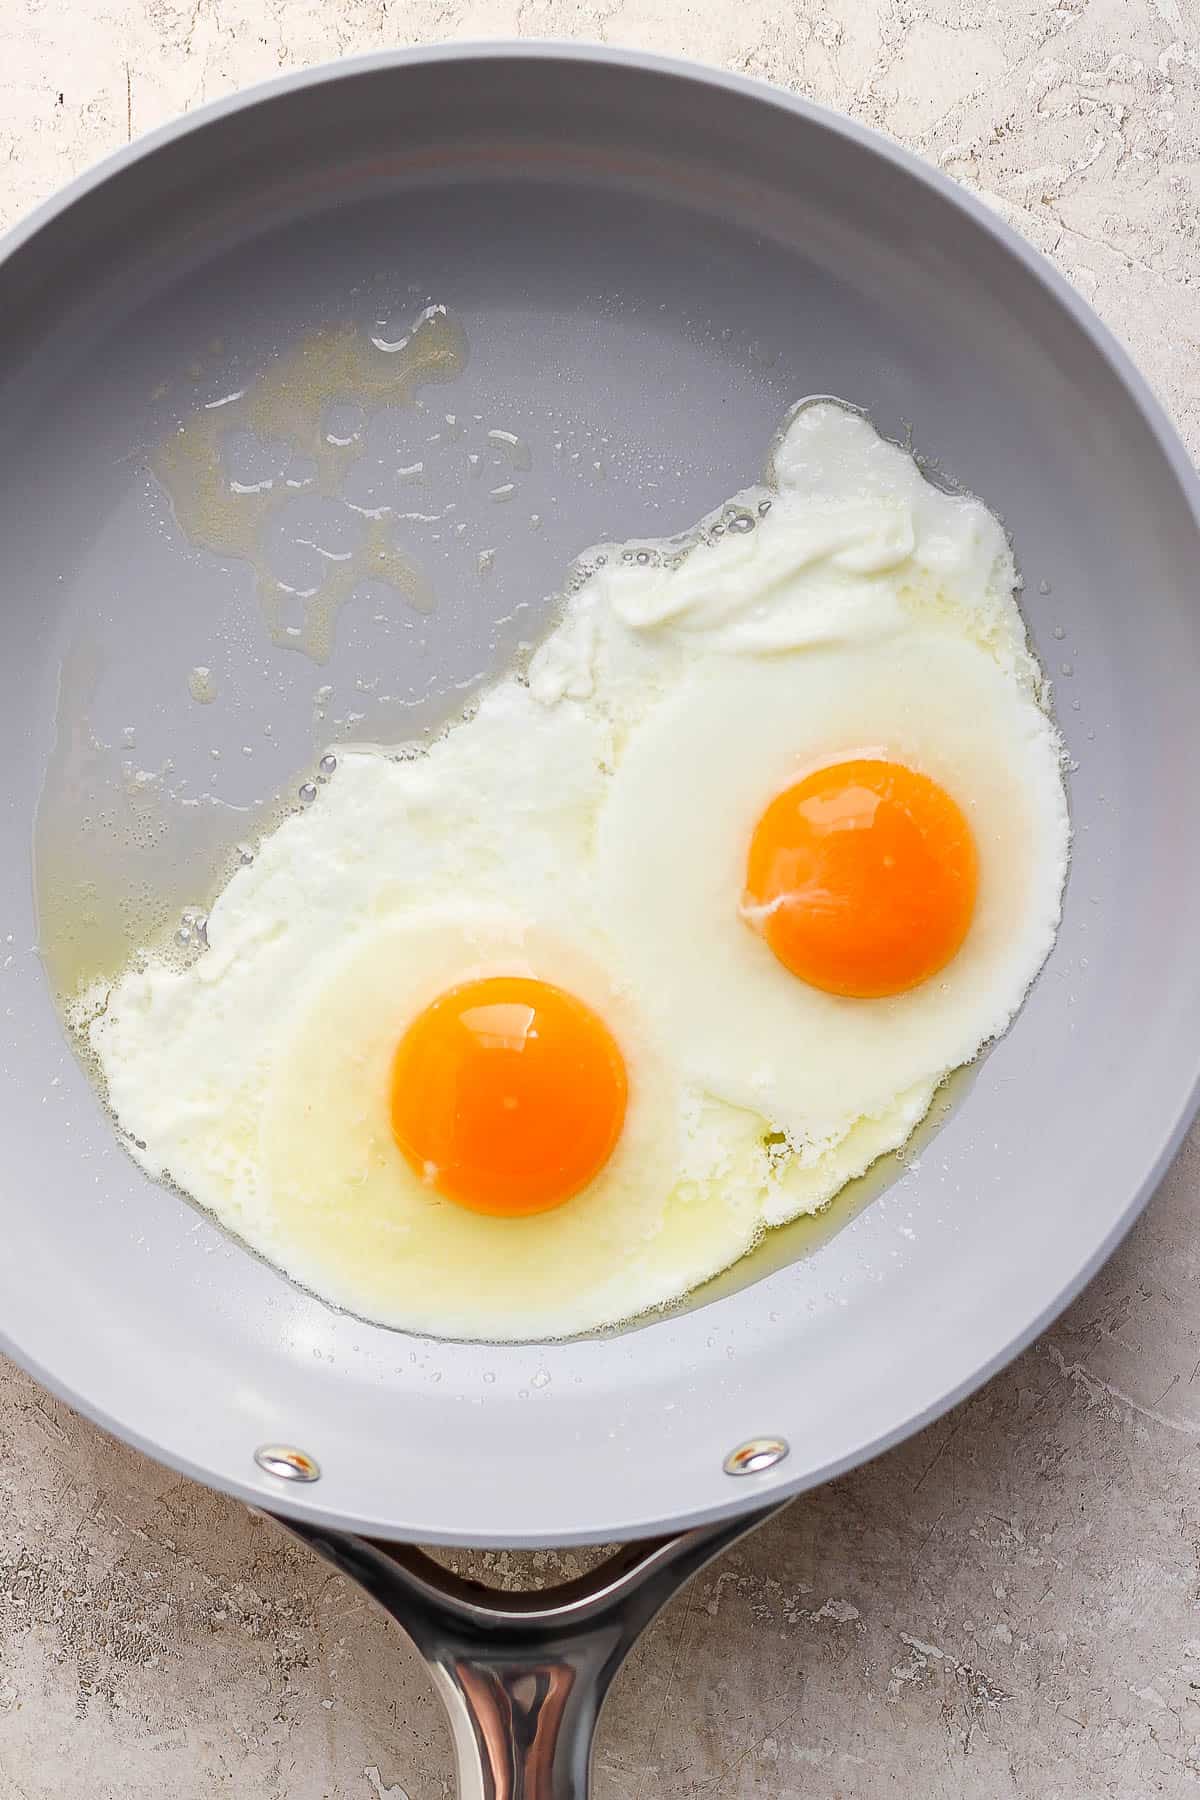 Two eggs cooking in a skillet.